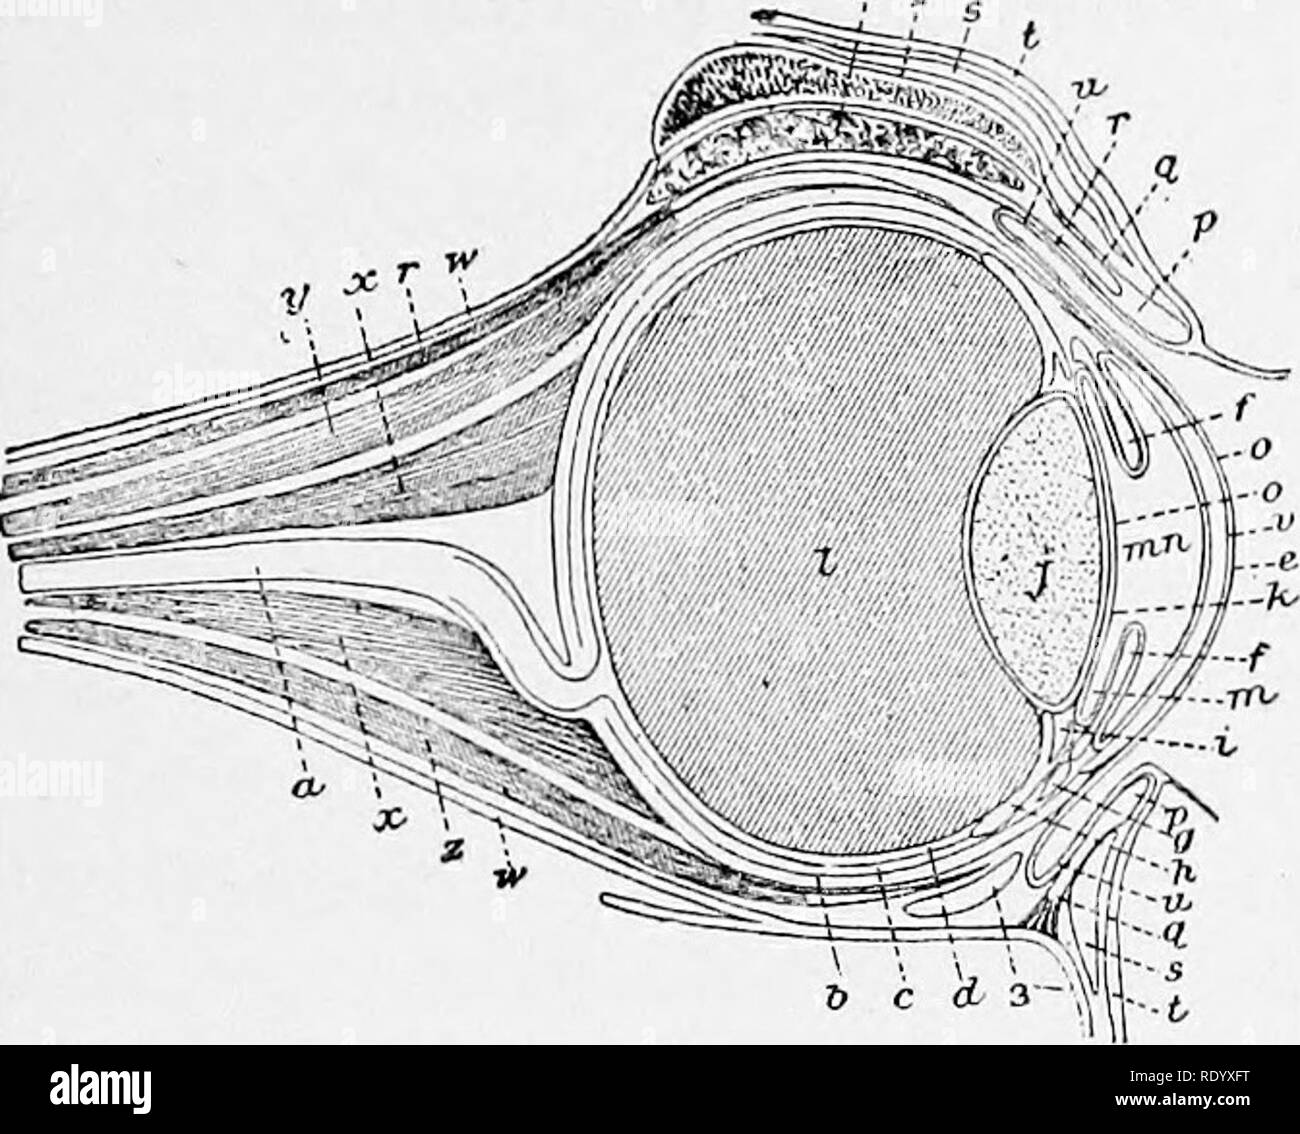 . Manual of operative veterinary surgery. Veterinary surgery. ON THE ESSENTIAL OEGANS OF SIGHT. 747. Fig. 53S. âTheoretical Section of the Horse's Eye. a.âOptic nerve. 6.âSclerotic, câChoroid.ârf.âEetina. eâCornea. /.âIris.â &lt;7ft.âCiliary circle lor ligament) and processes given oft by the choroid, though repre- sented as isolated from it, In order to indicate their limits more clearly, i.âInsertion oÂ£ the ciliary processes on the crystalline lens. j.âCrystalline lens. k.âCrystalline capsule. I.âVitreous hody. â Â«i?i.âAnterior and posterior chambers, o.âTheoretical indication of the membr Stock Photo